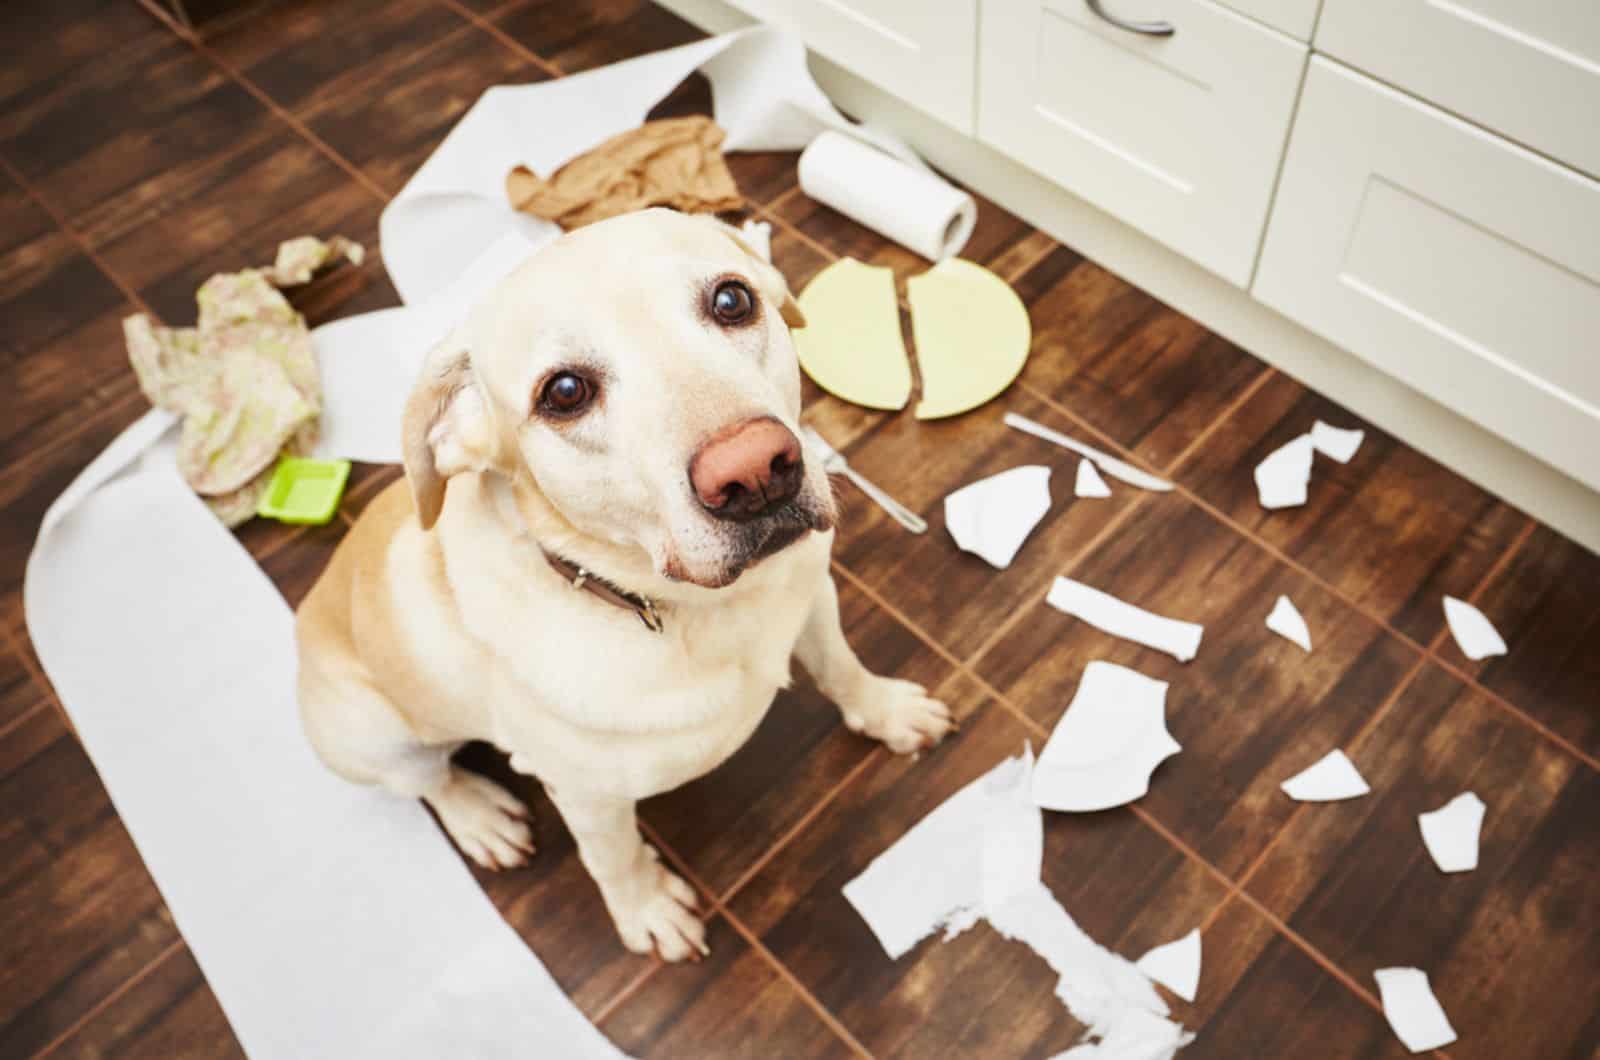 labrador dog in the middle of mess in the kitchen